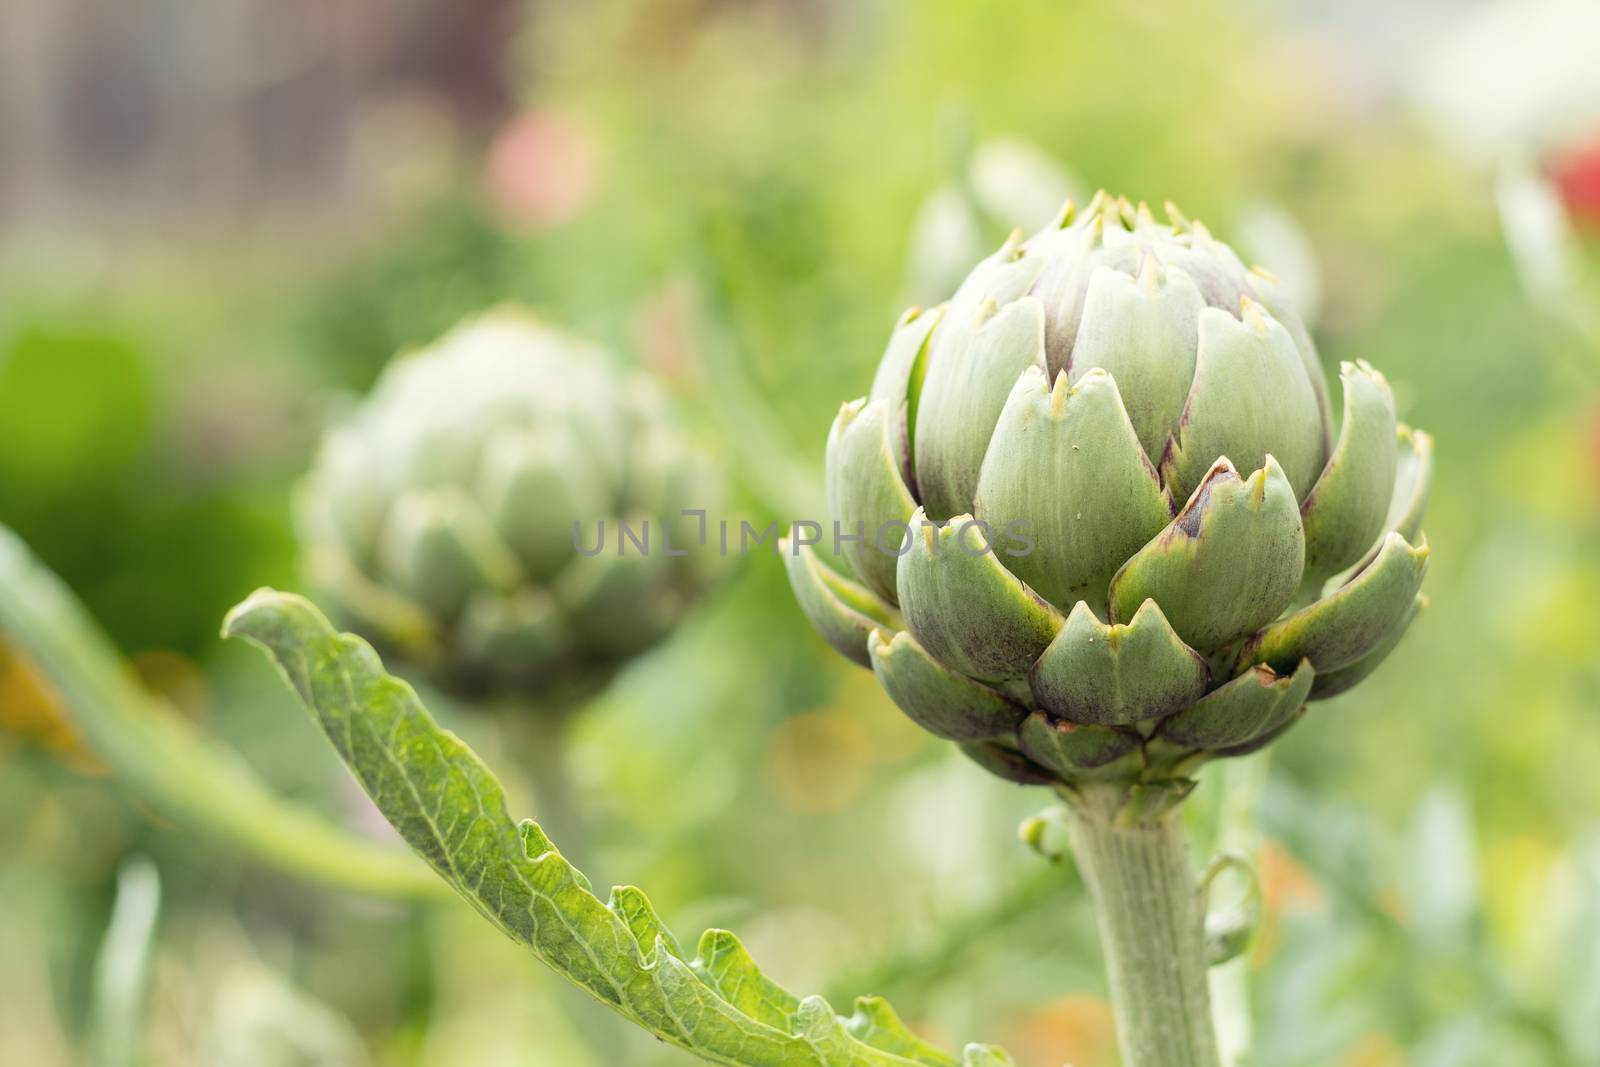 Artichoke with purplish flower growing in the field in Ukraine. Natural agriculture image